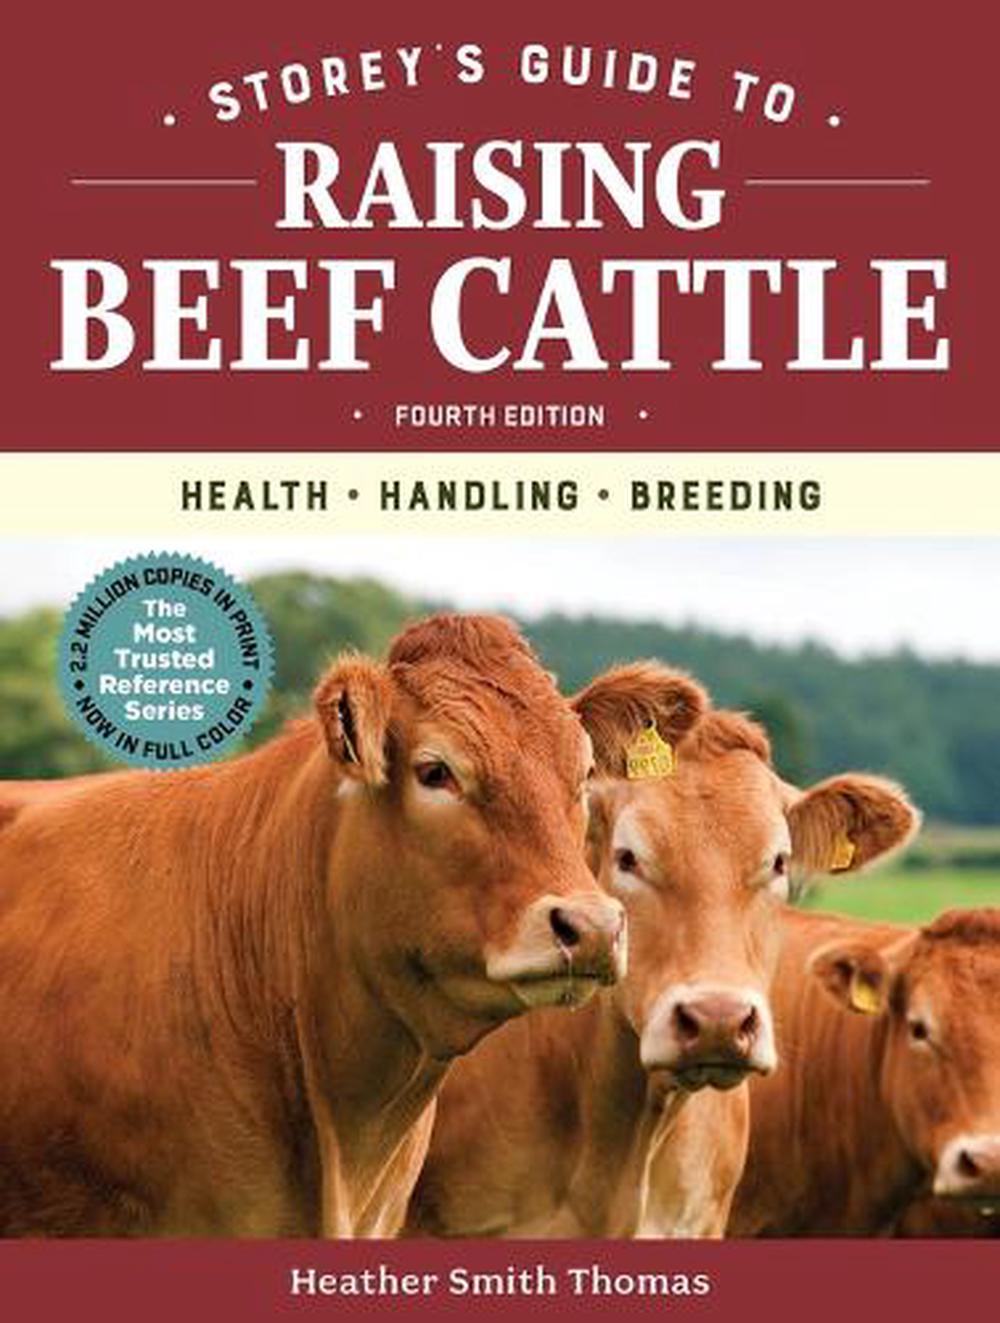 Guide to Grass-Fed Cattle